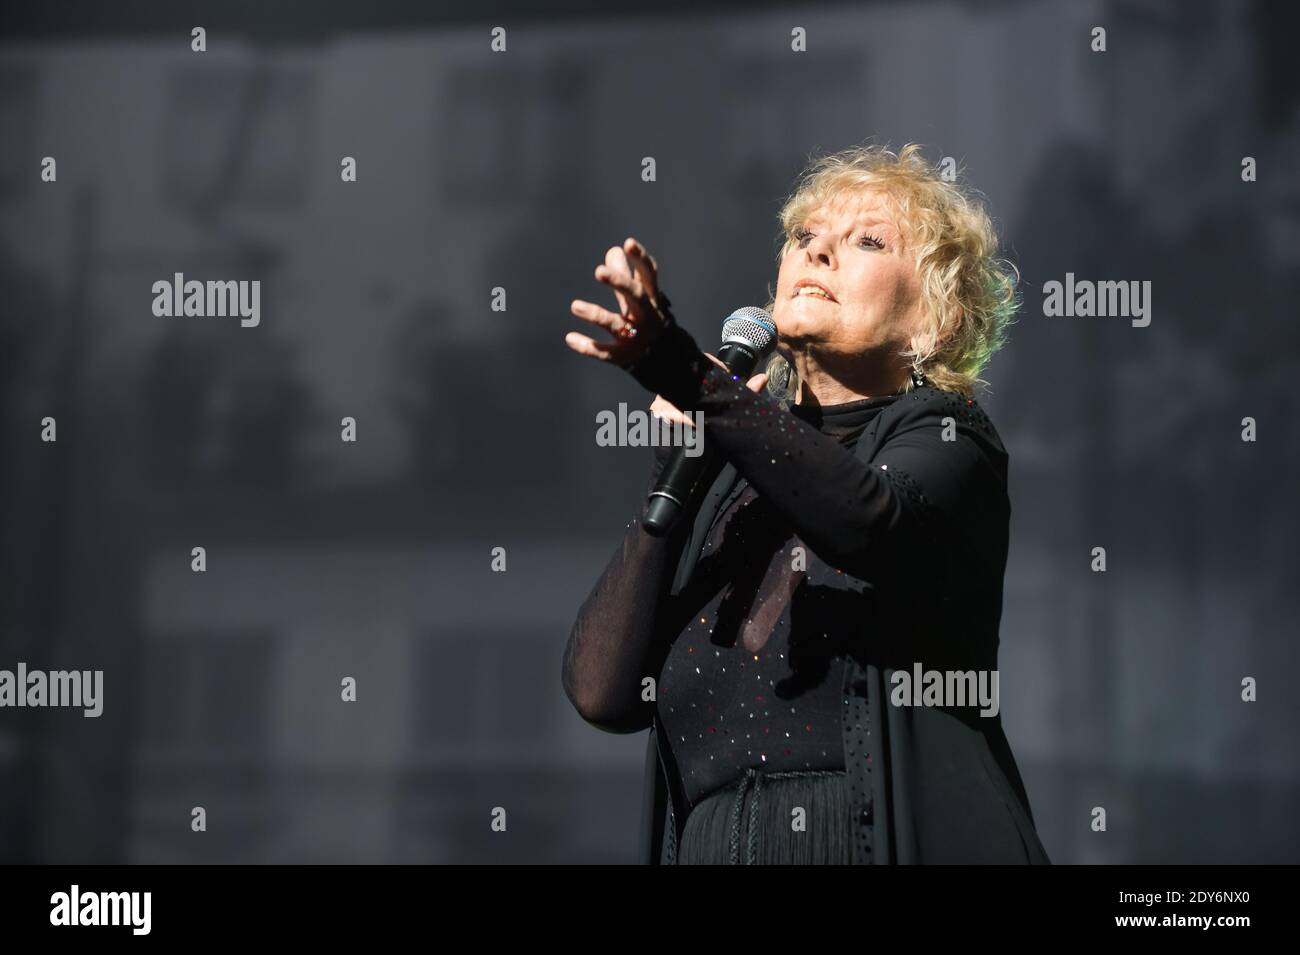 Petula Clark performs during Rendez-Vous Avec Les Stars held at the Arena,  Geneva, Switzerland on November 15, 2014. Photo by Loona/ABACAPRESS.COM  Stock Photo - Alamy